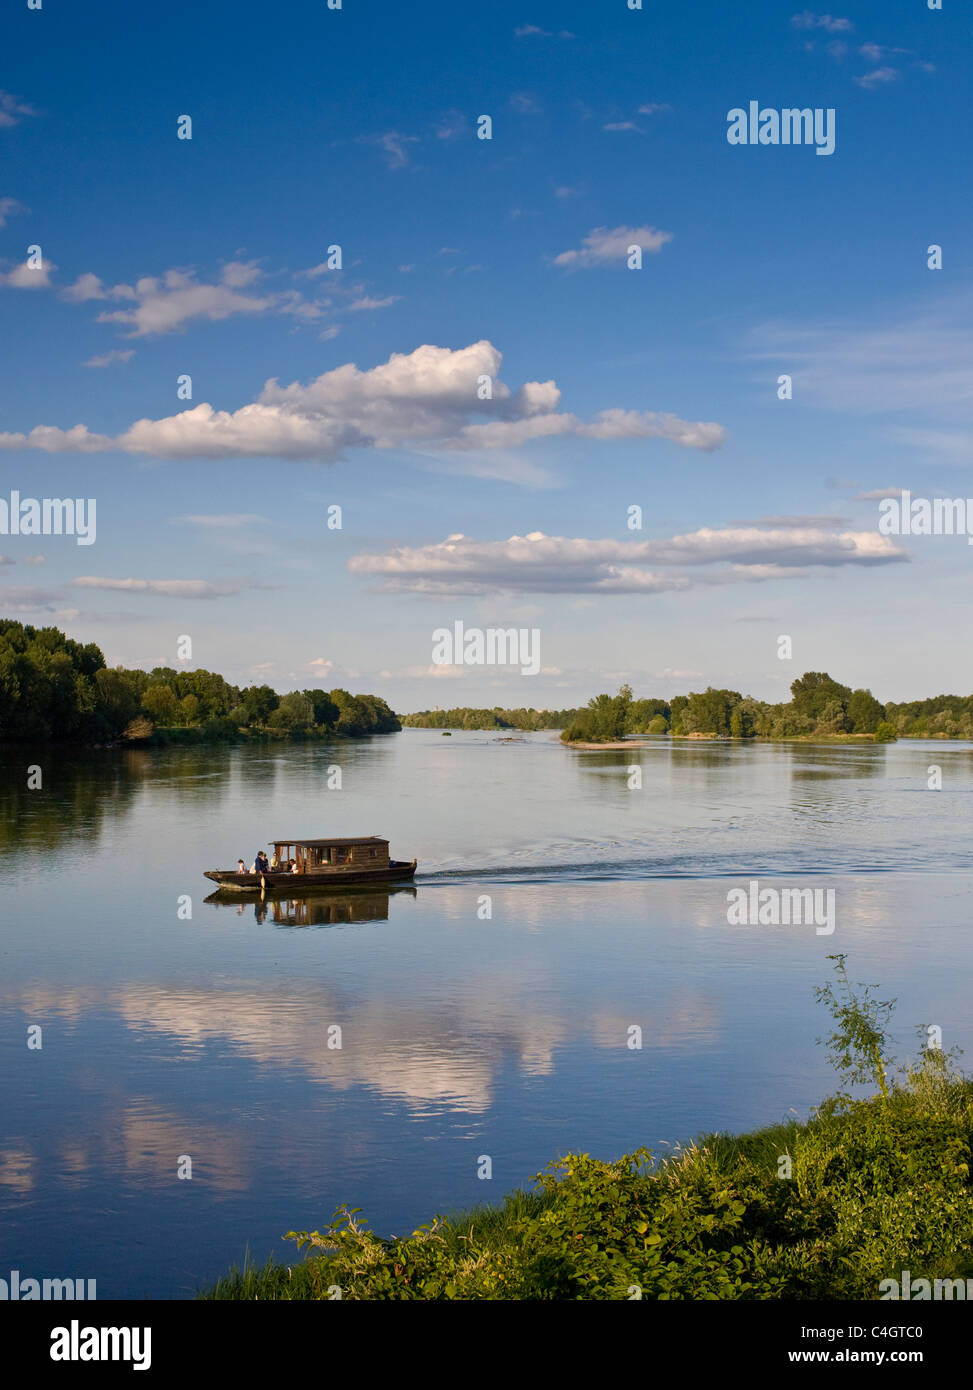 Wooden motor boat on the River Loire at Candes St Martin, Loire Valley, France Stock Photo